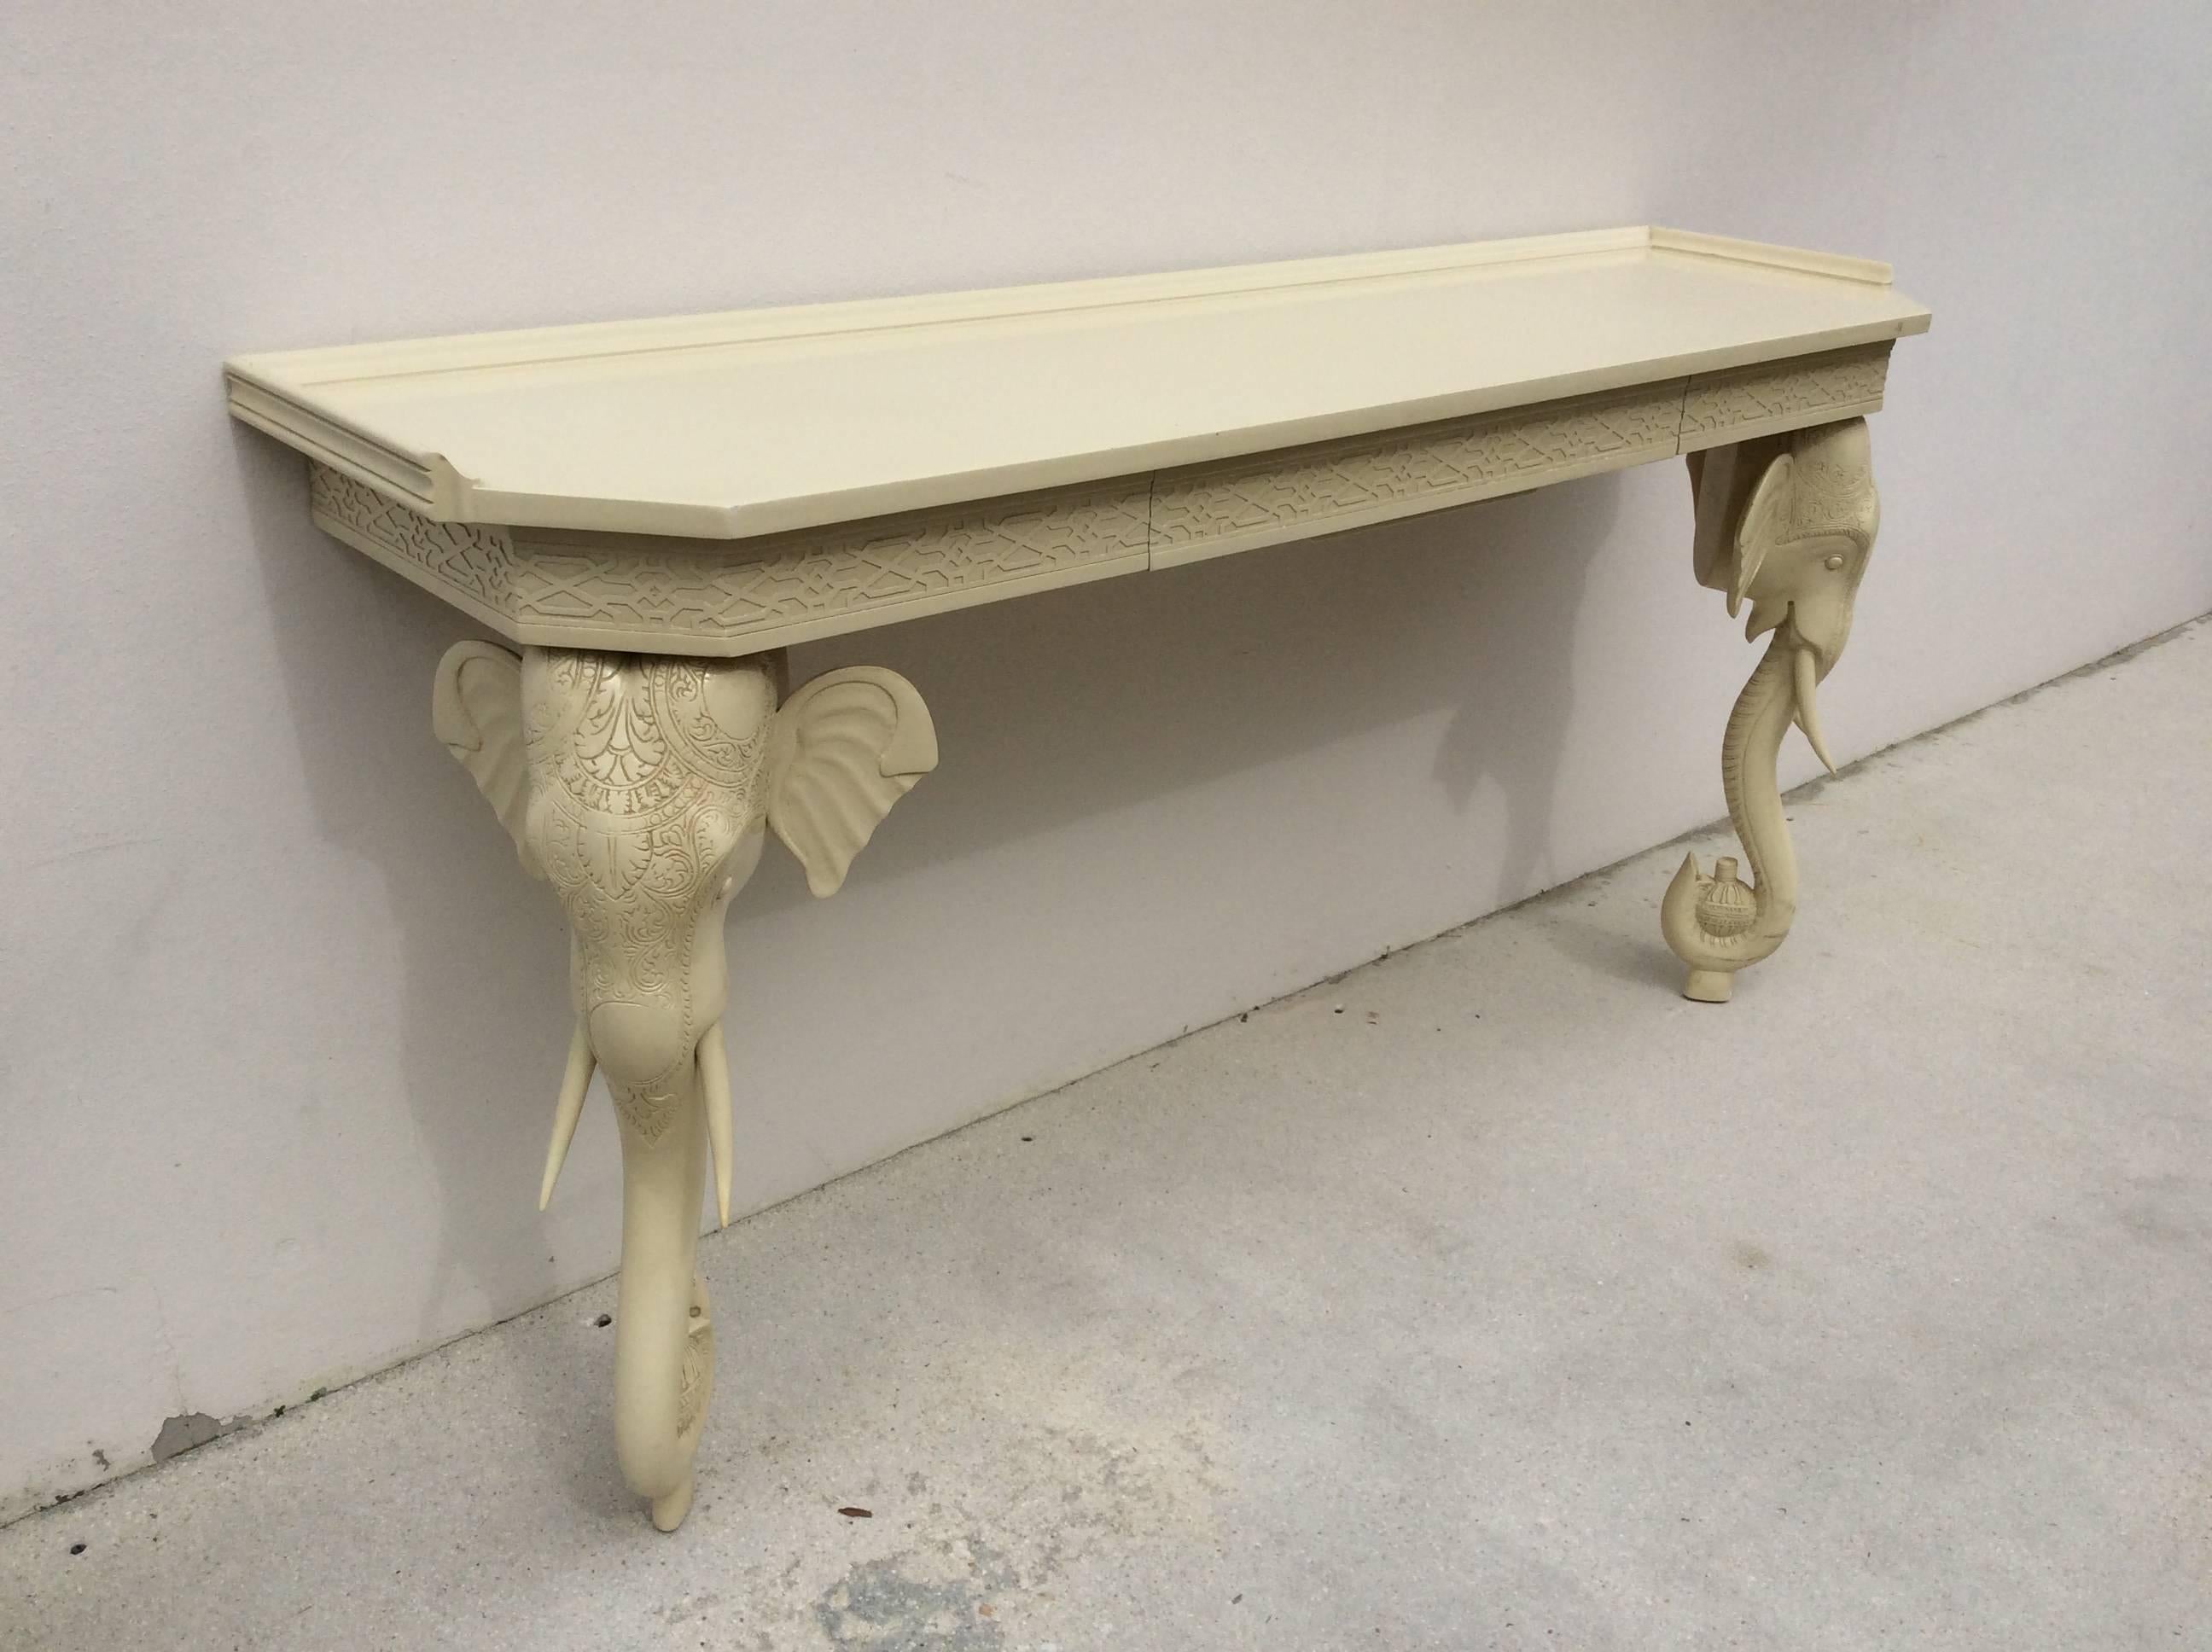 20th Century Vintage Gampel and Stoll Elephant Wall Console Table Desk Fretwork Chinoiserie 